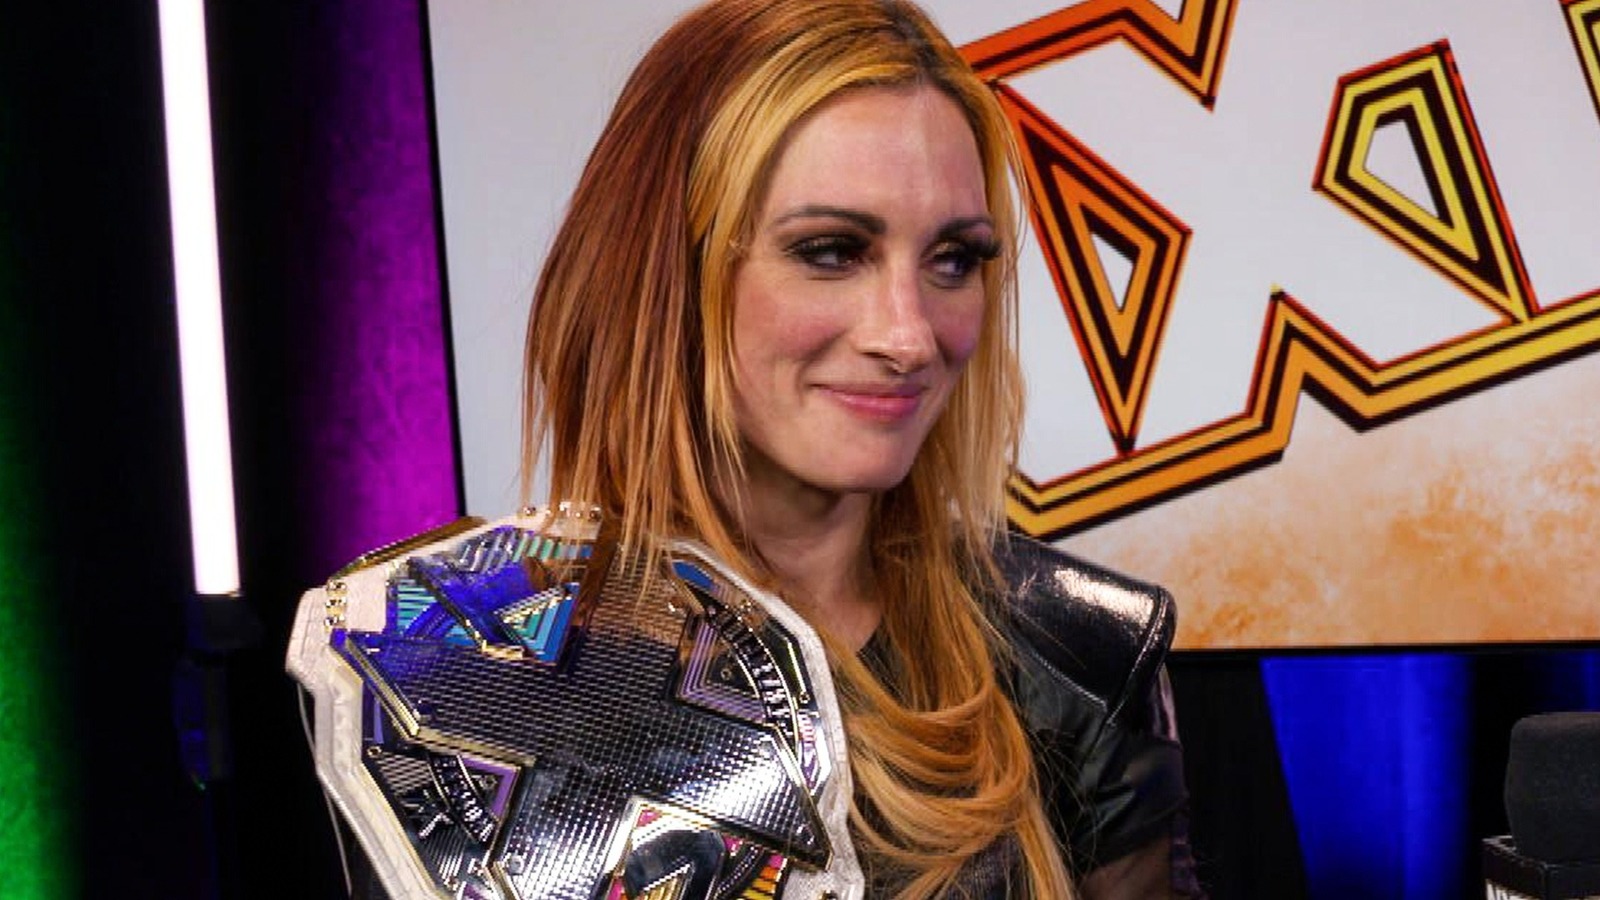 Video See New NXT Women's Champ Becky Lynch's Victory Speech To WWE Fans